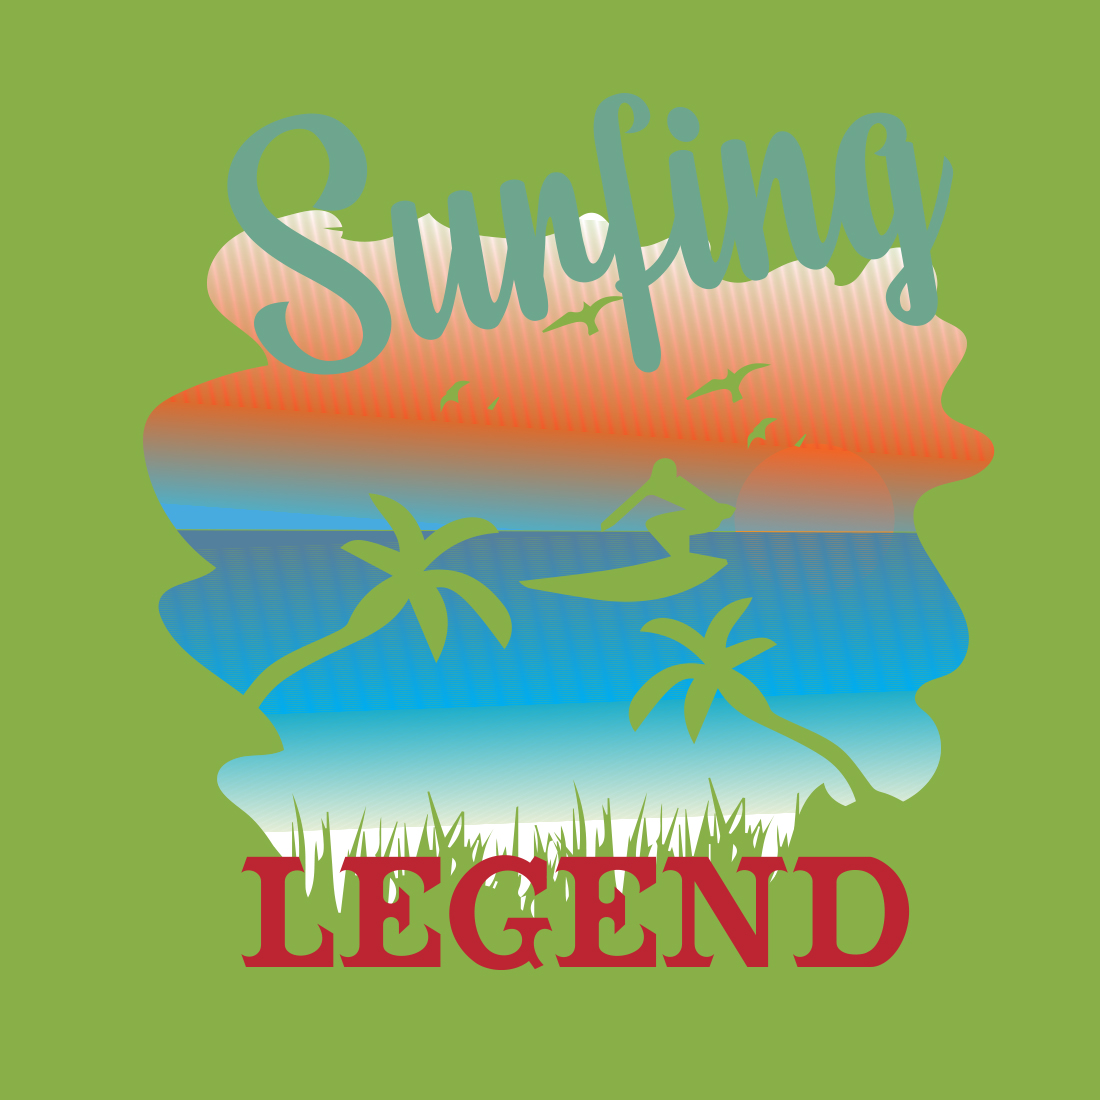 Surfing legend preview image.